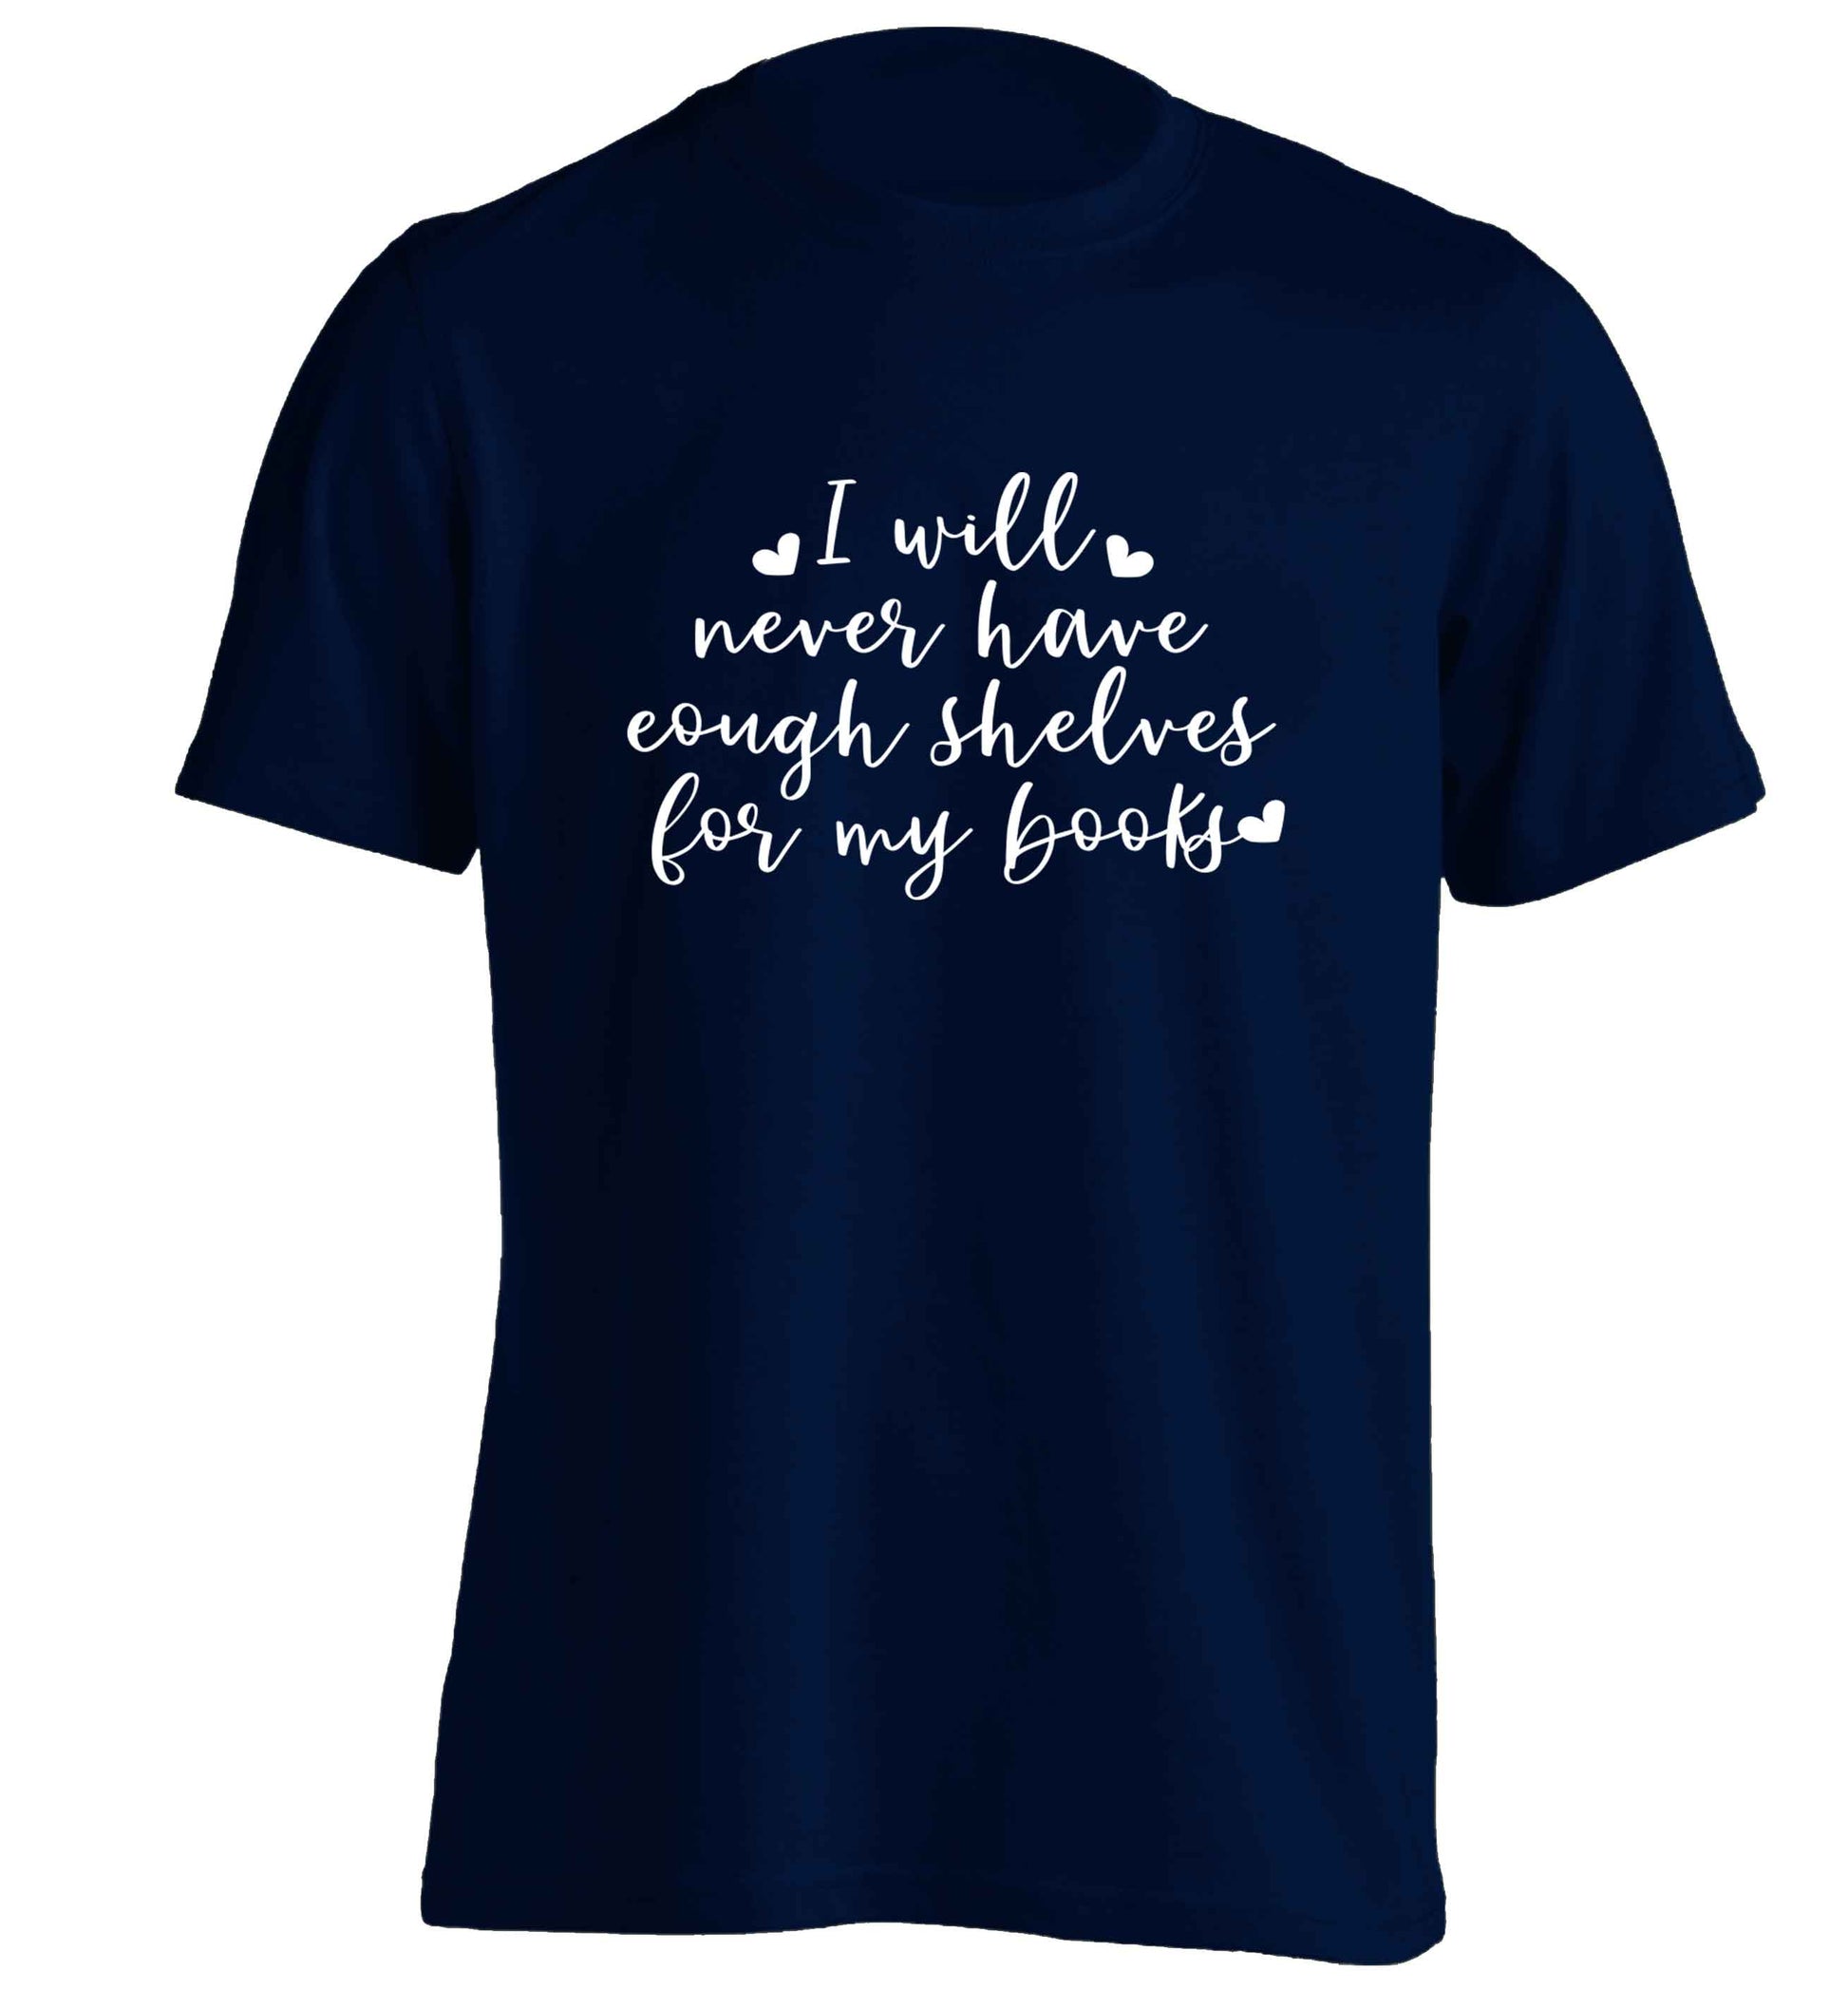 I will never have enough shelves for my books adults unisex navy Tshirt 2XL